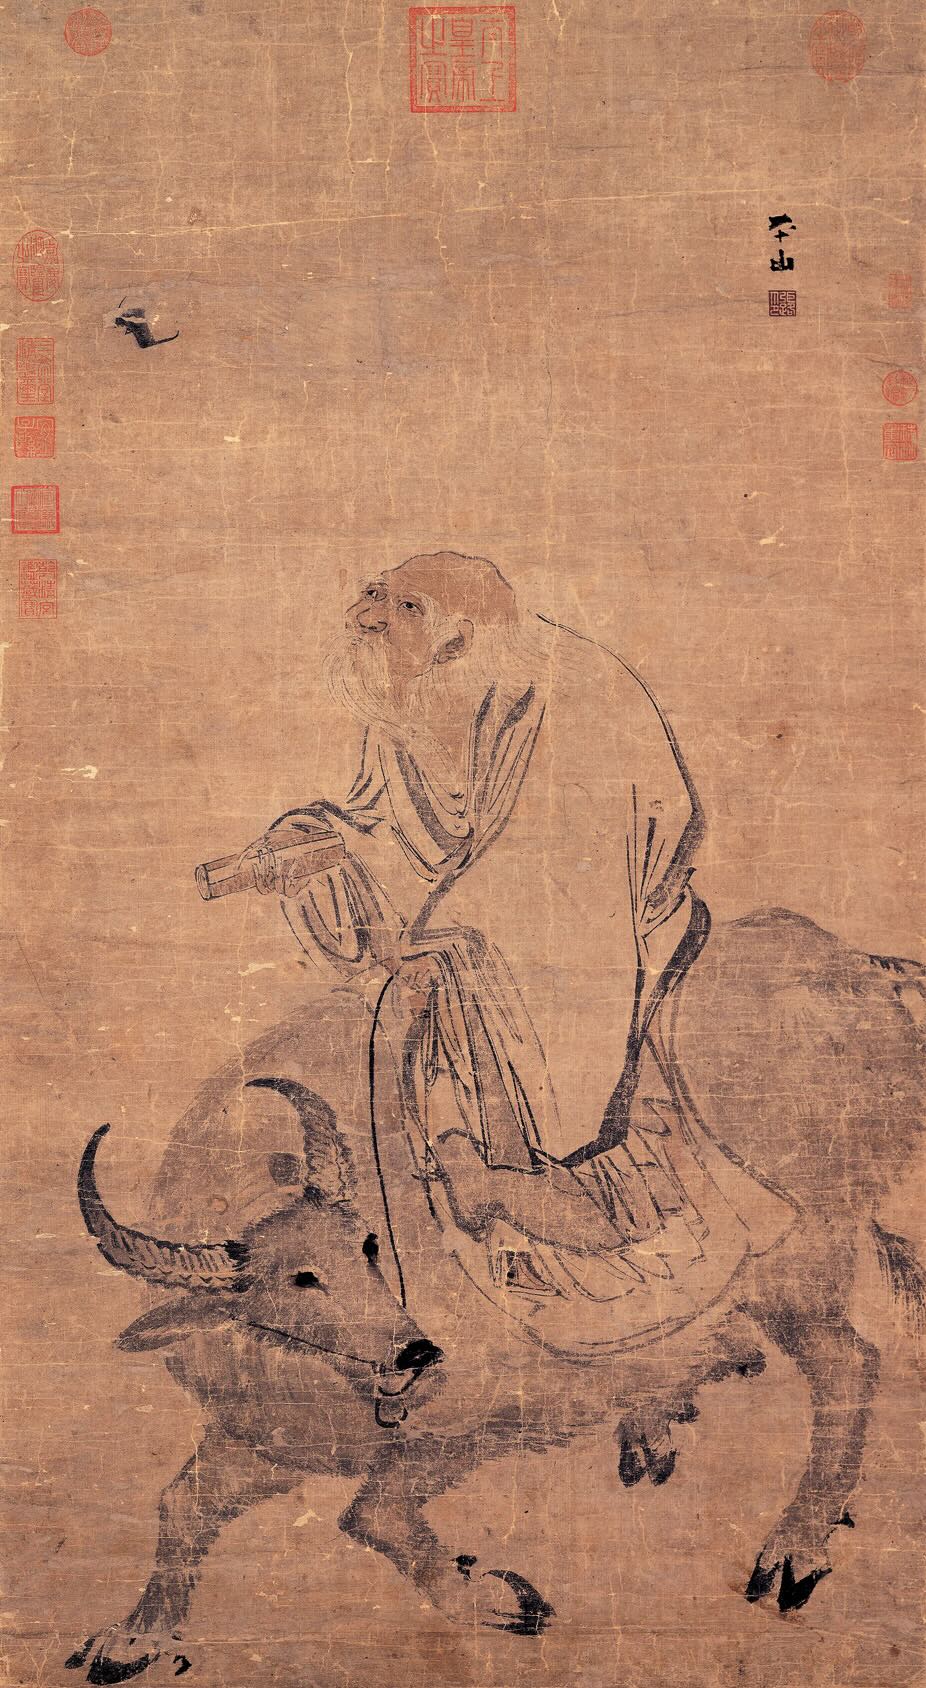 A portrait of Laozi riding an ox. Painted by Zhang Lu in the 16th century, long after Laozi's legendary life.